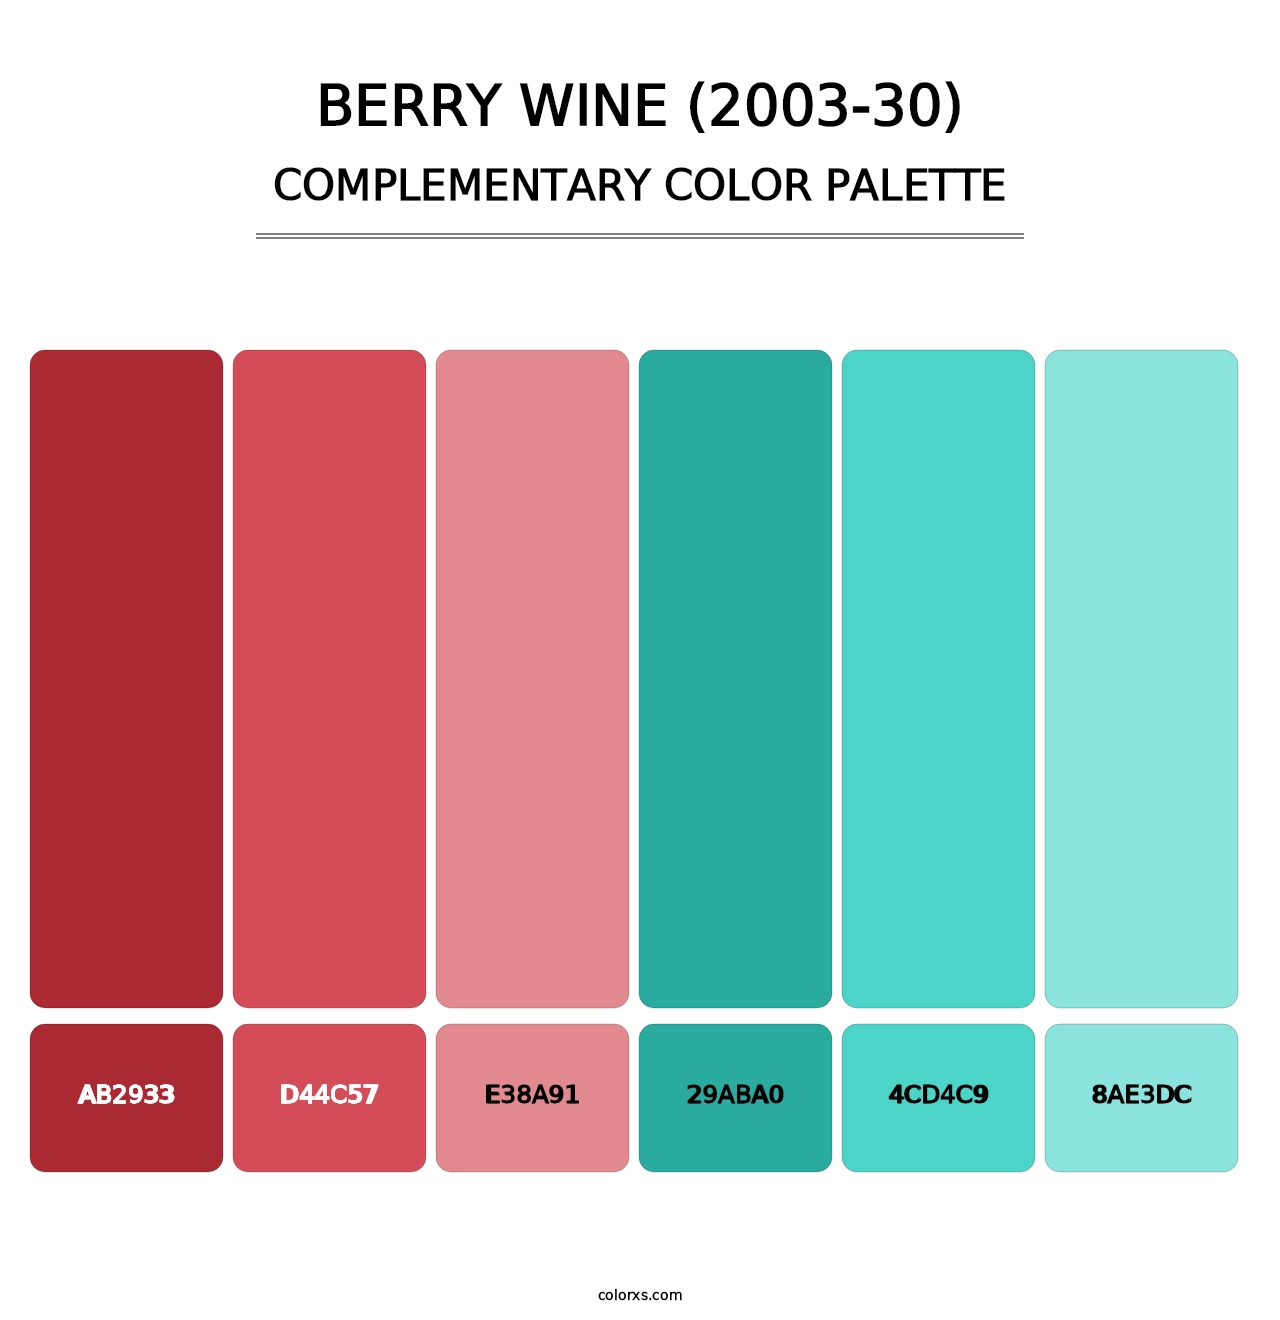 Berry Wine (2003-30) - Complementary Color Palette